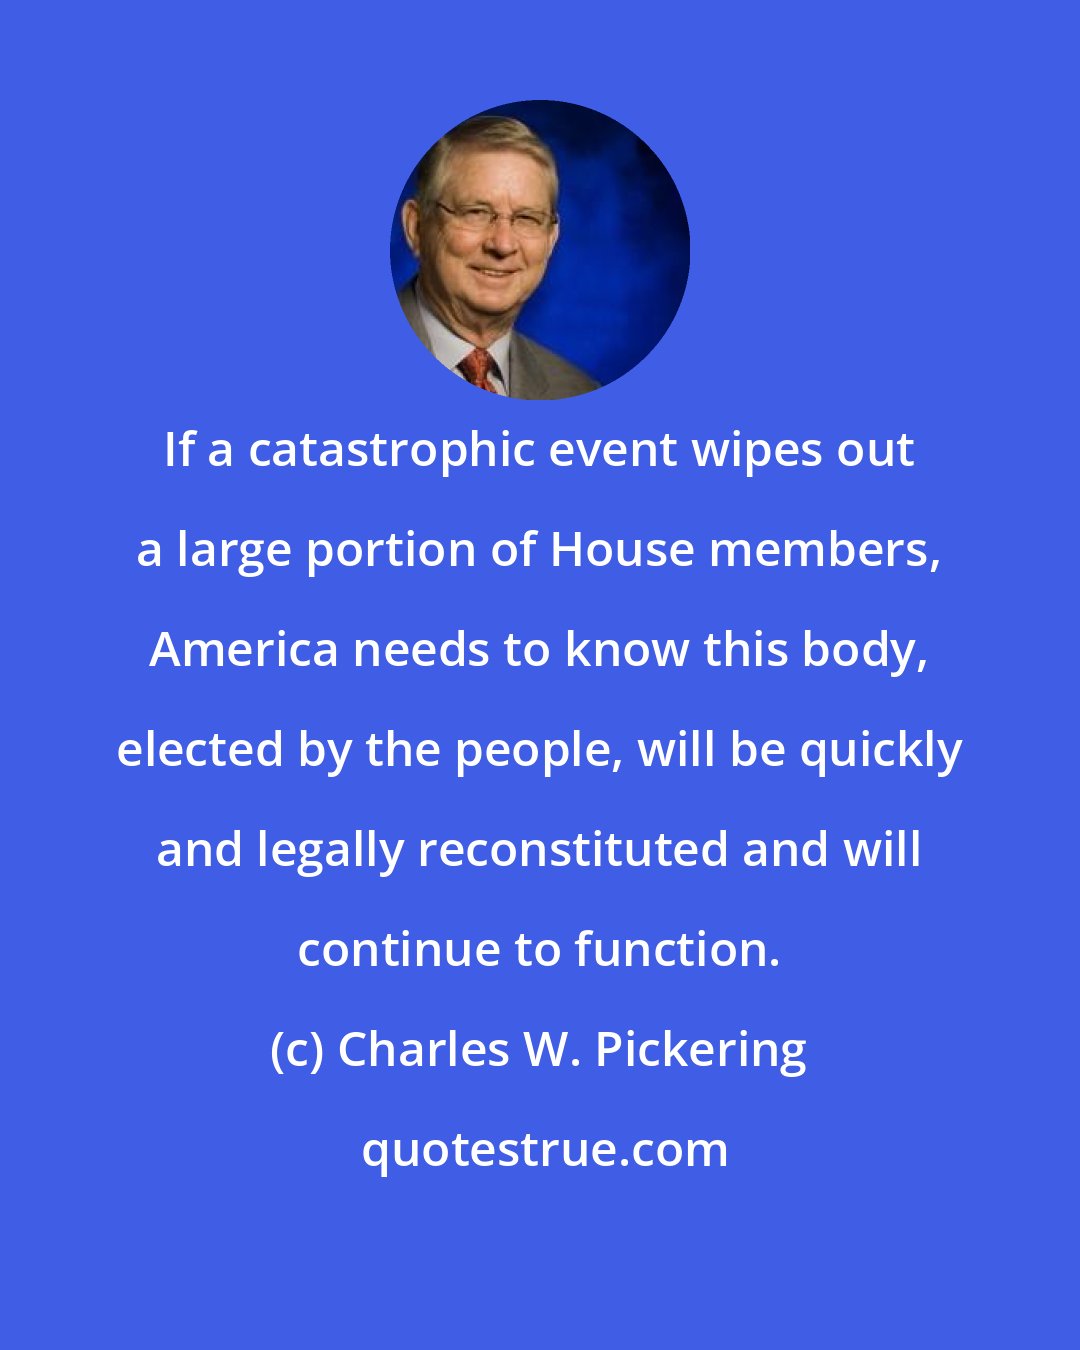 Charles W. Pickering: If a catastrophic event wipes out a large portion of House members, America needs to know this body, elected by the people, will be quickly and legally reconstituted and will continue to function.